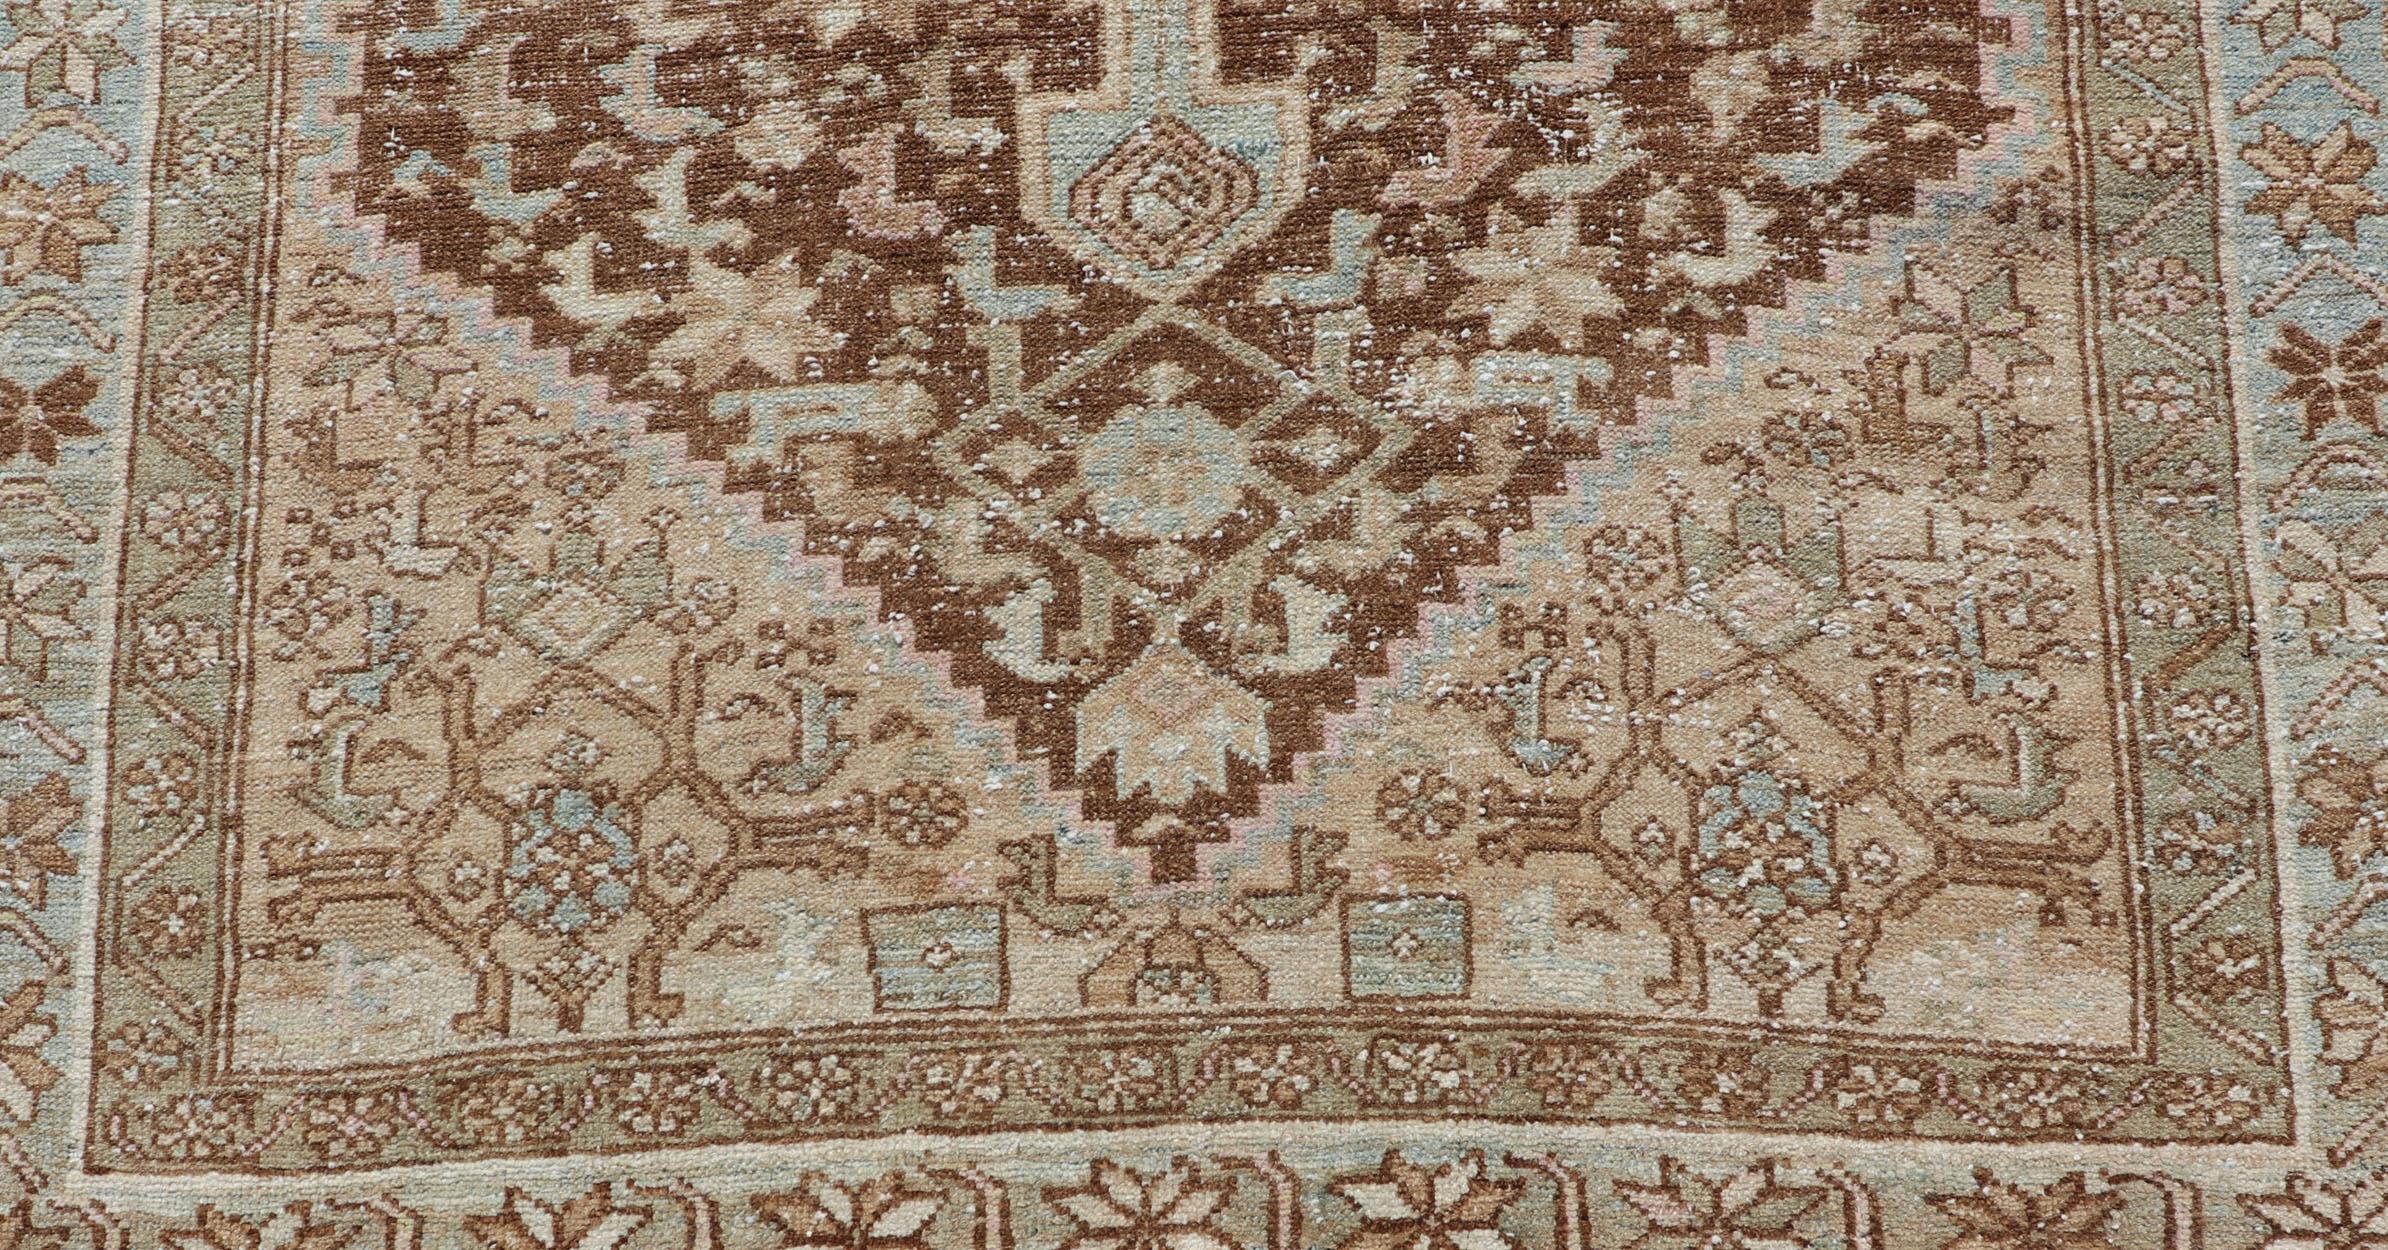 Earthy Tone Antique Persian Hamadan Rug with Medallion Design in Brown and Blue In Good Condition For Sale In Atlanta, GA